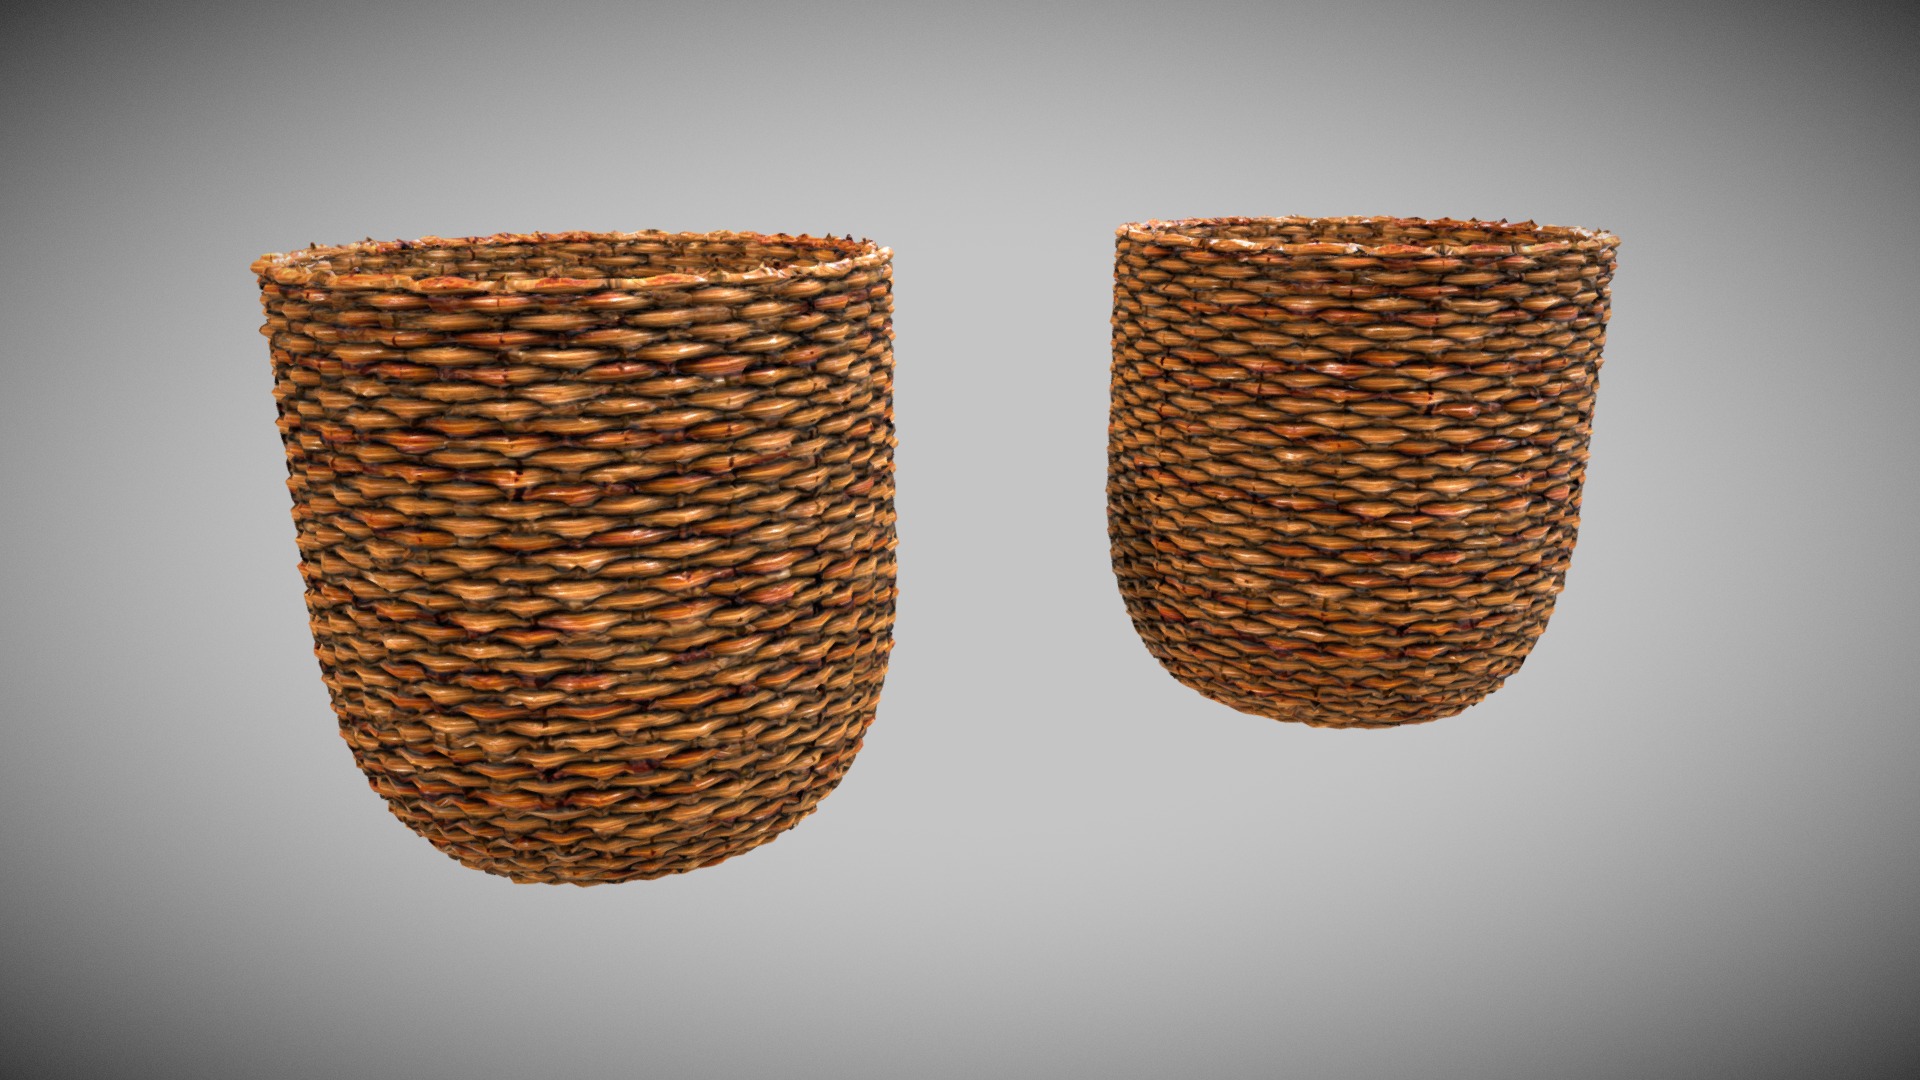 3D model Rattan Basket - This is a 3D model of the Rattan Basket. The 3D model is about a couple of woven baskets.